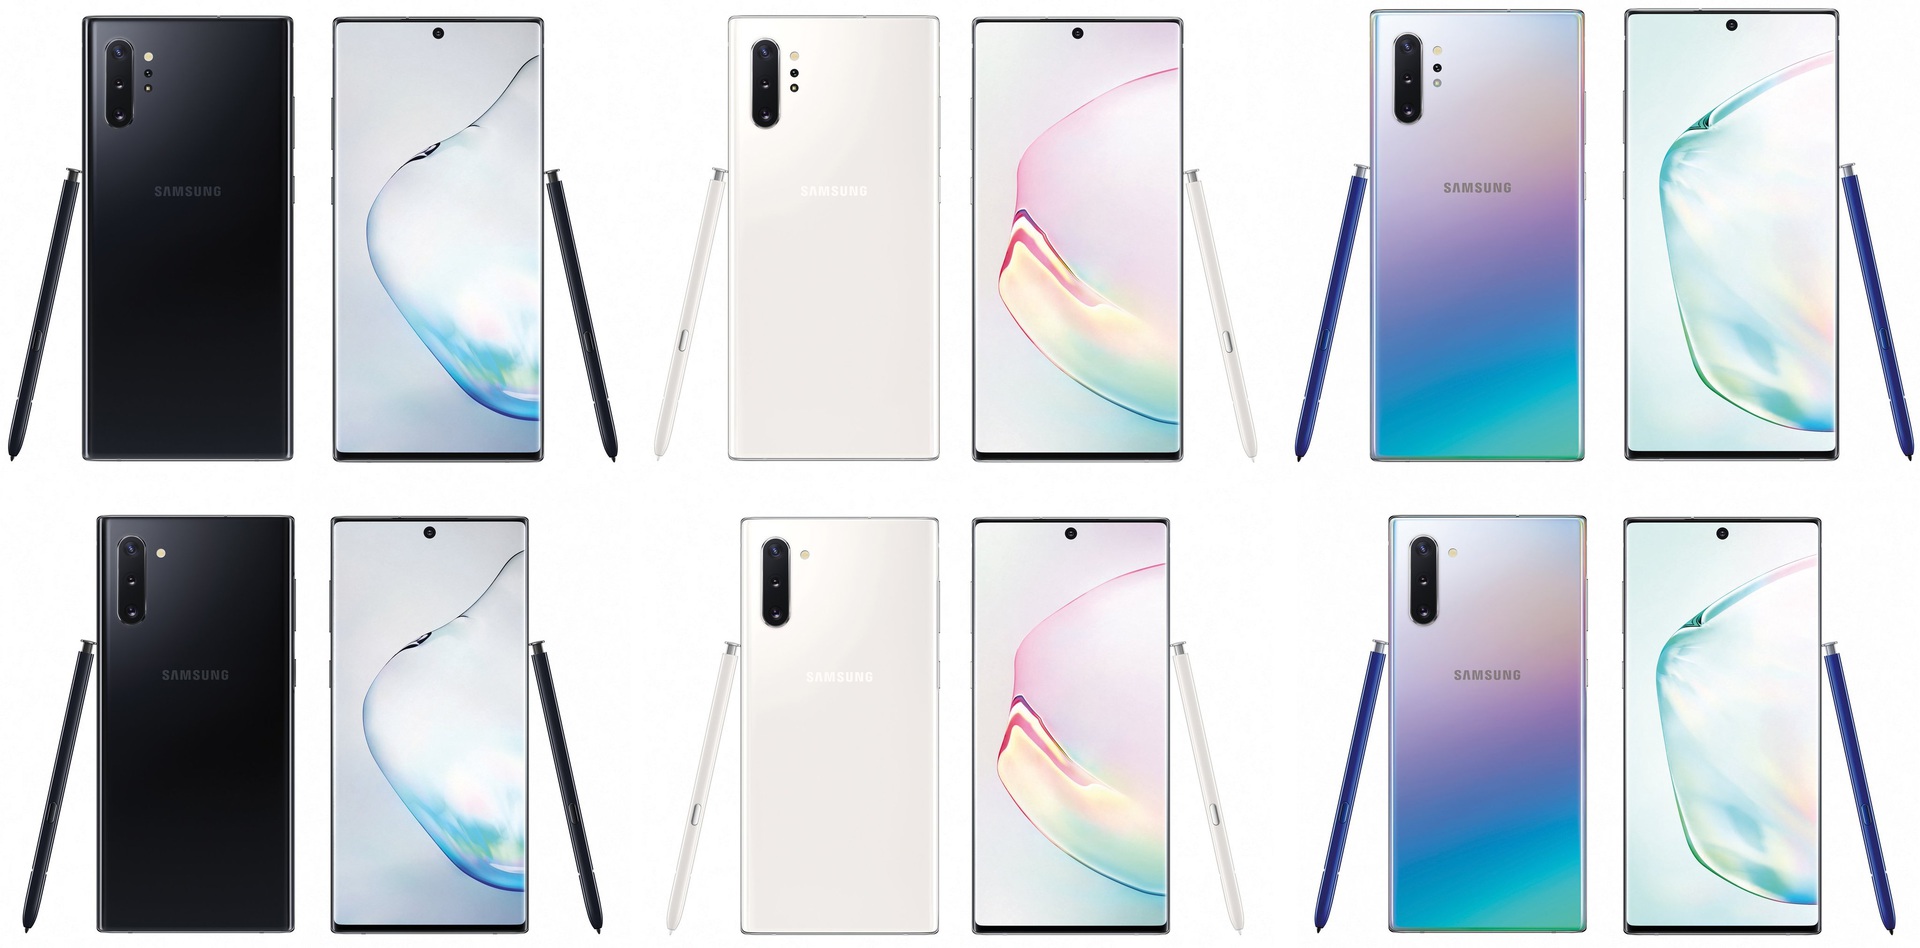 Samsung Galaxy Note 10 renders at the bottom Galaxy Note 10 Plus renders at the top in various colors.